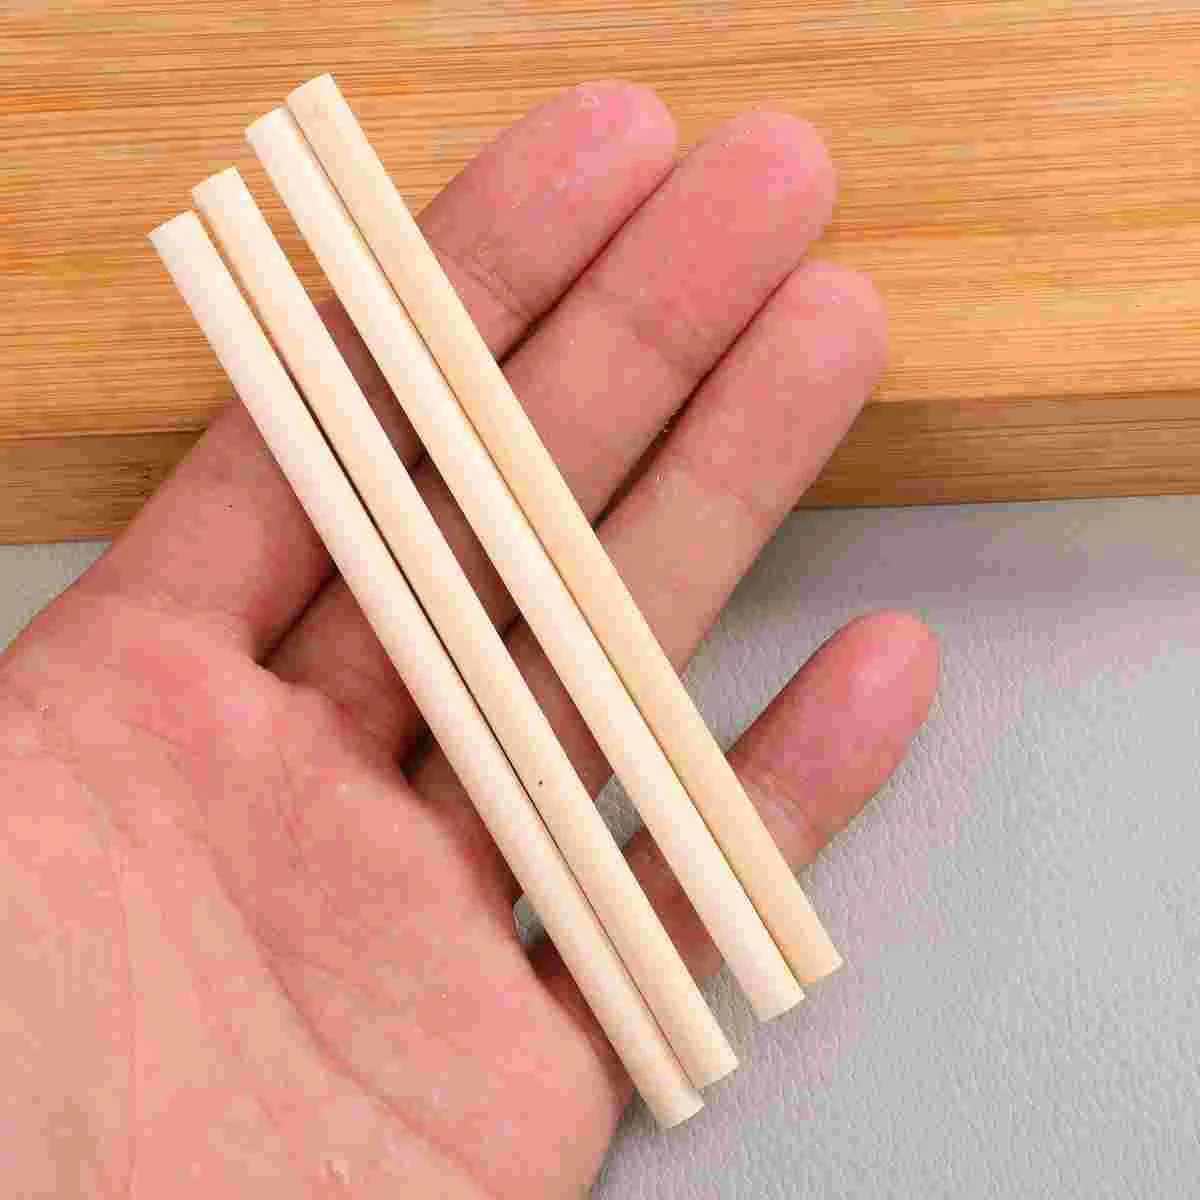 

Wooden Rods Sticks Dowels Crafts Dowel Craft Cake Stacking 2 Inch Round Wood Accessory